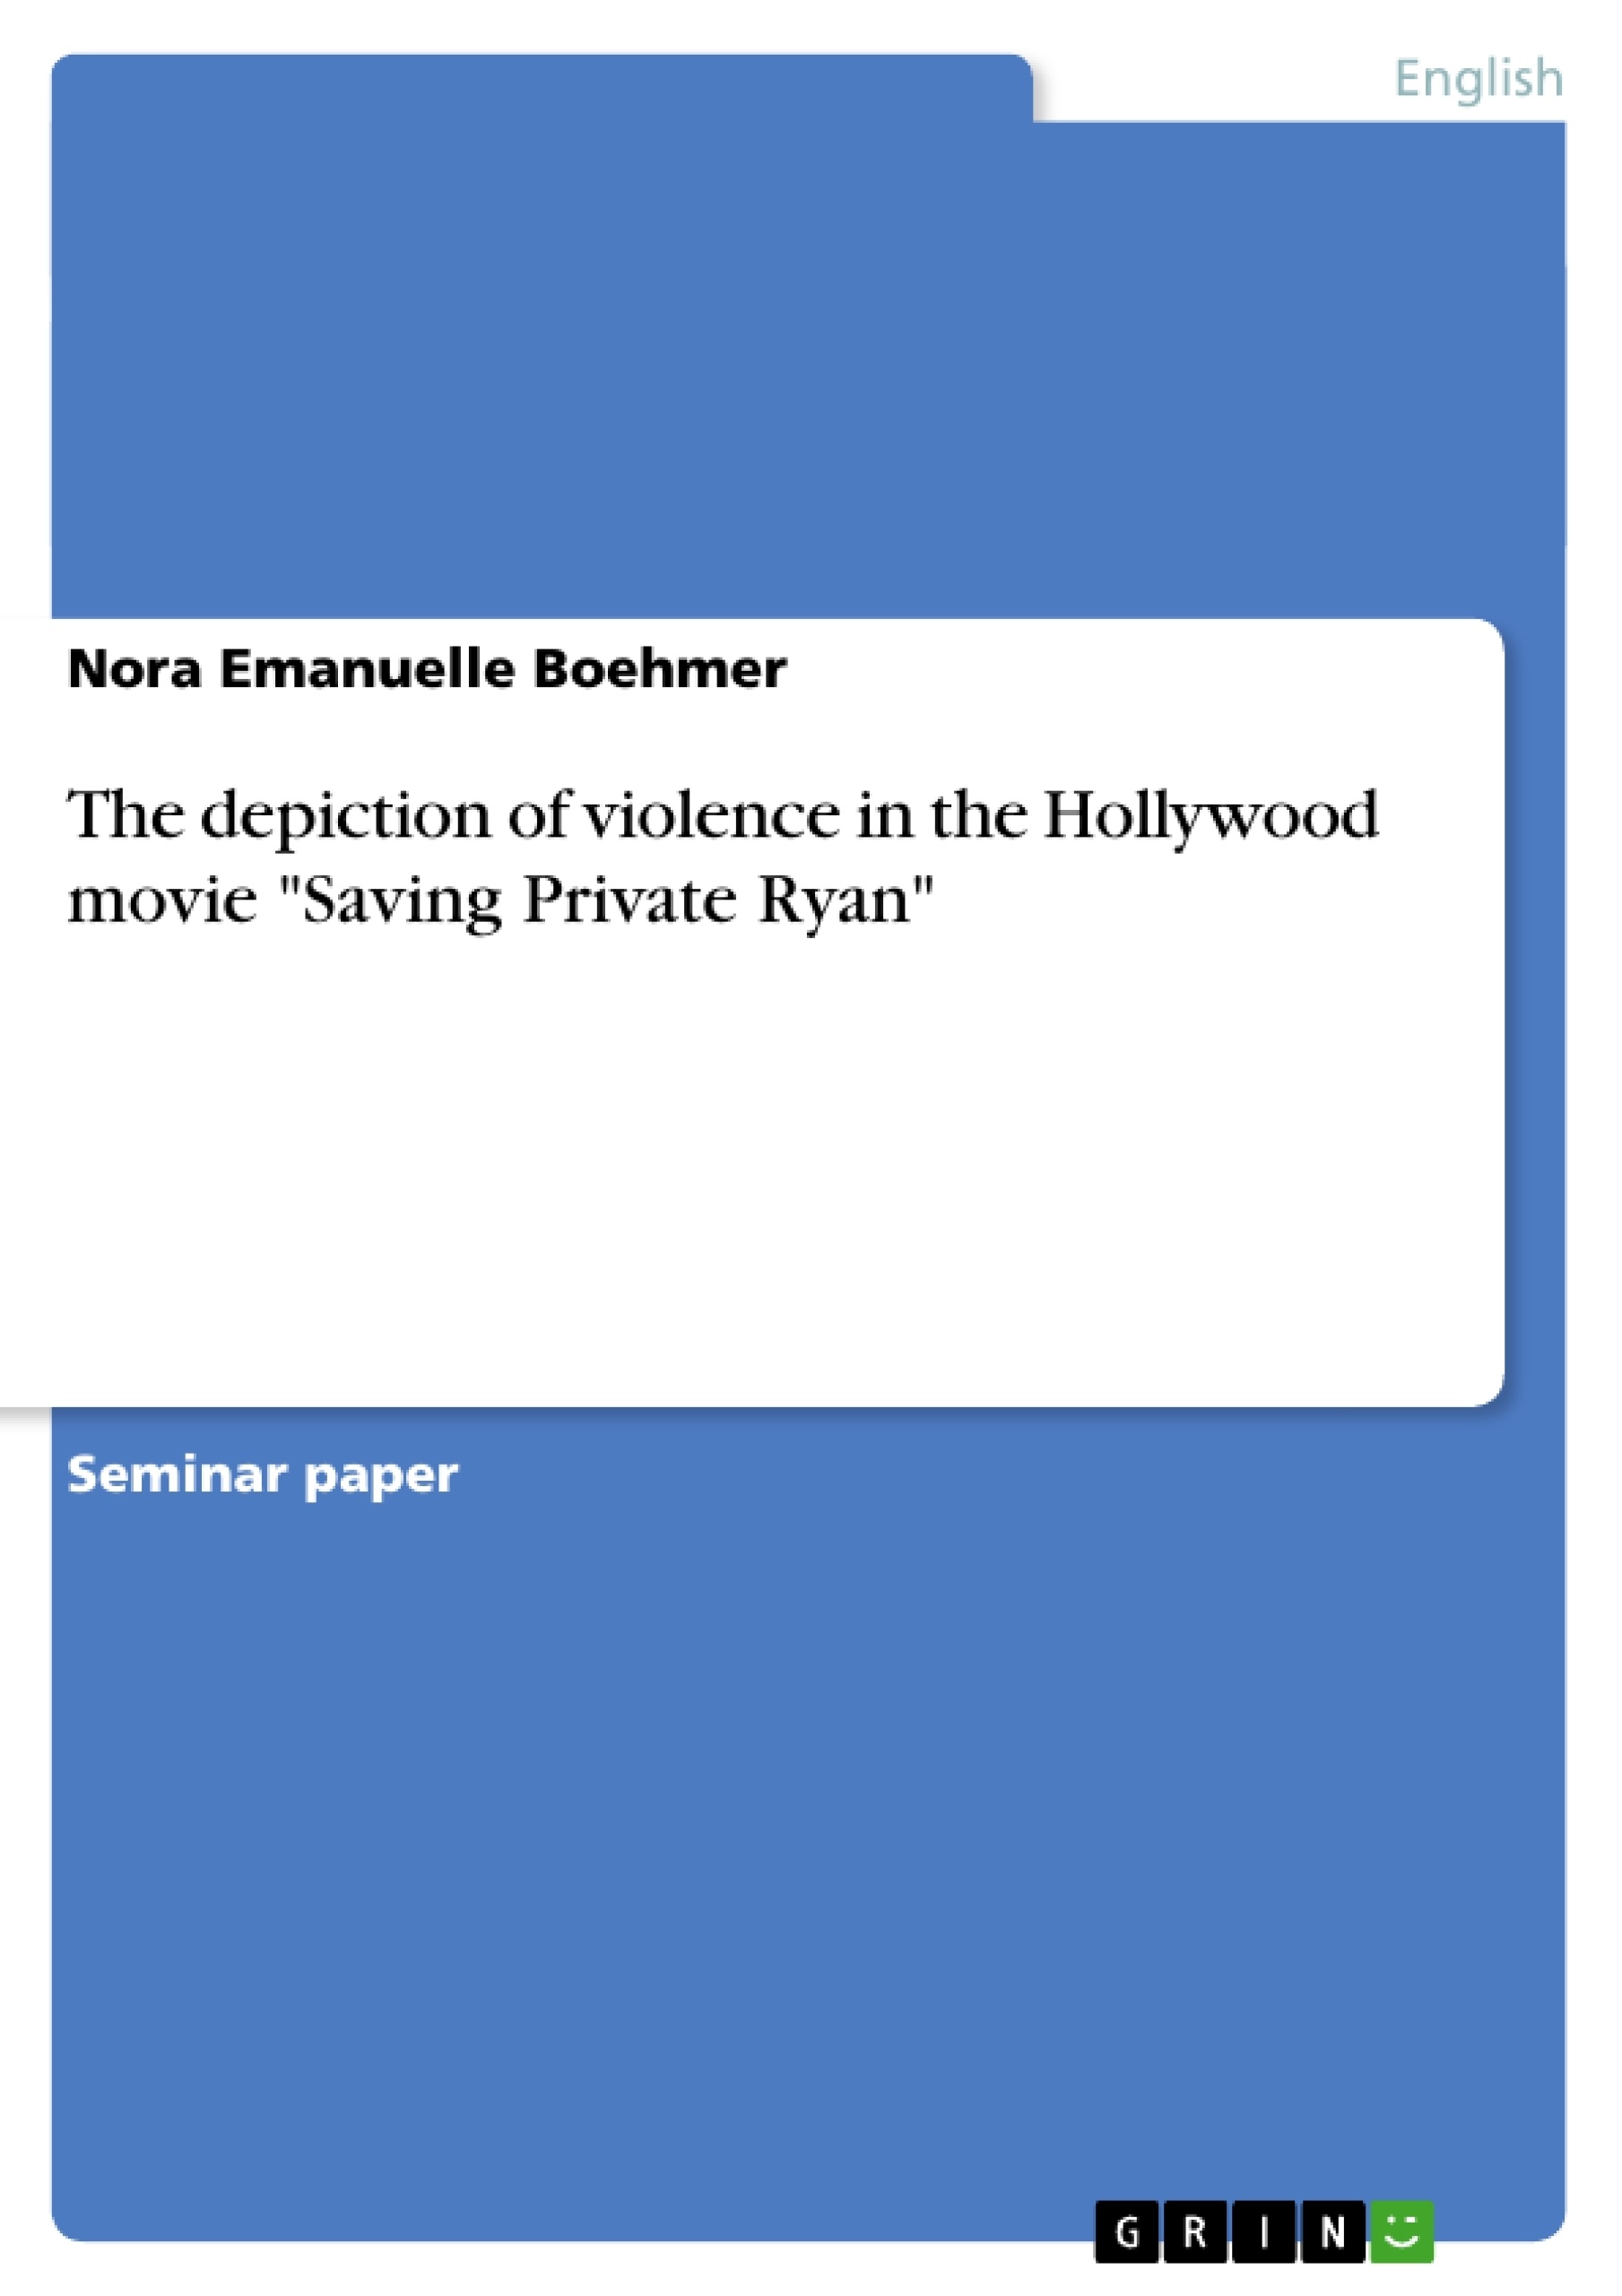 Titre: The depiction of violence in the Hollywood movie "Saving Private Ryan"